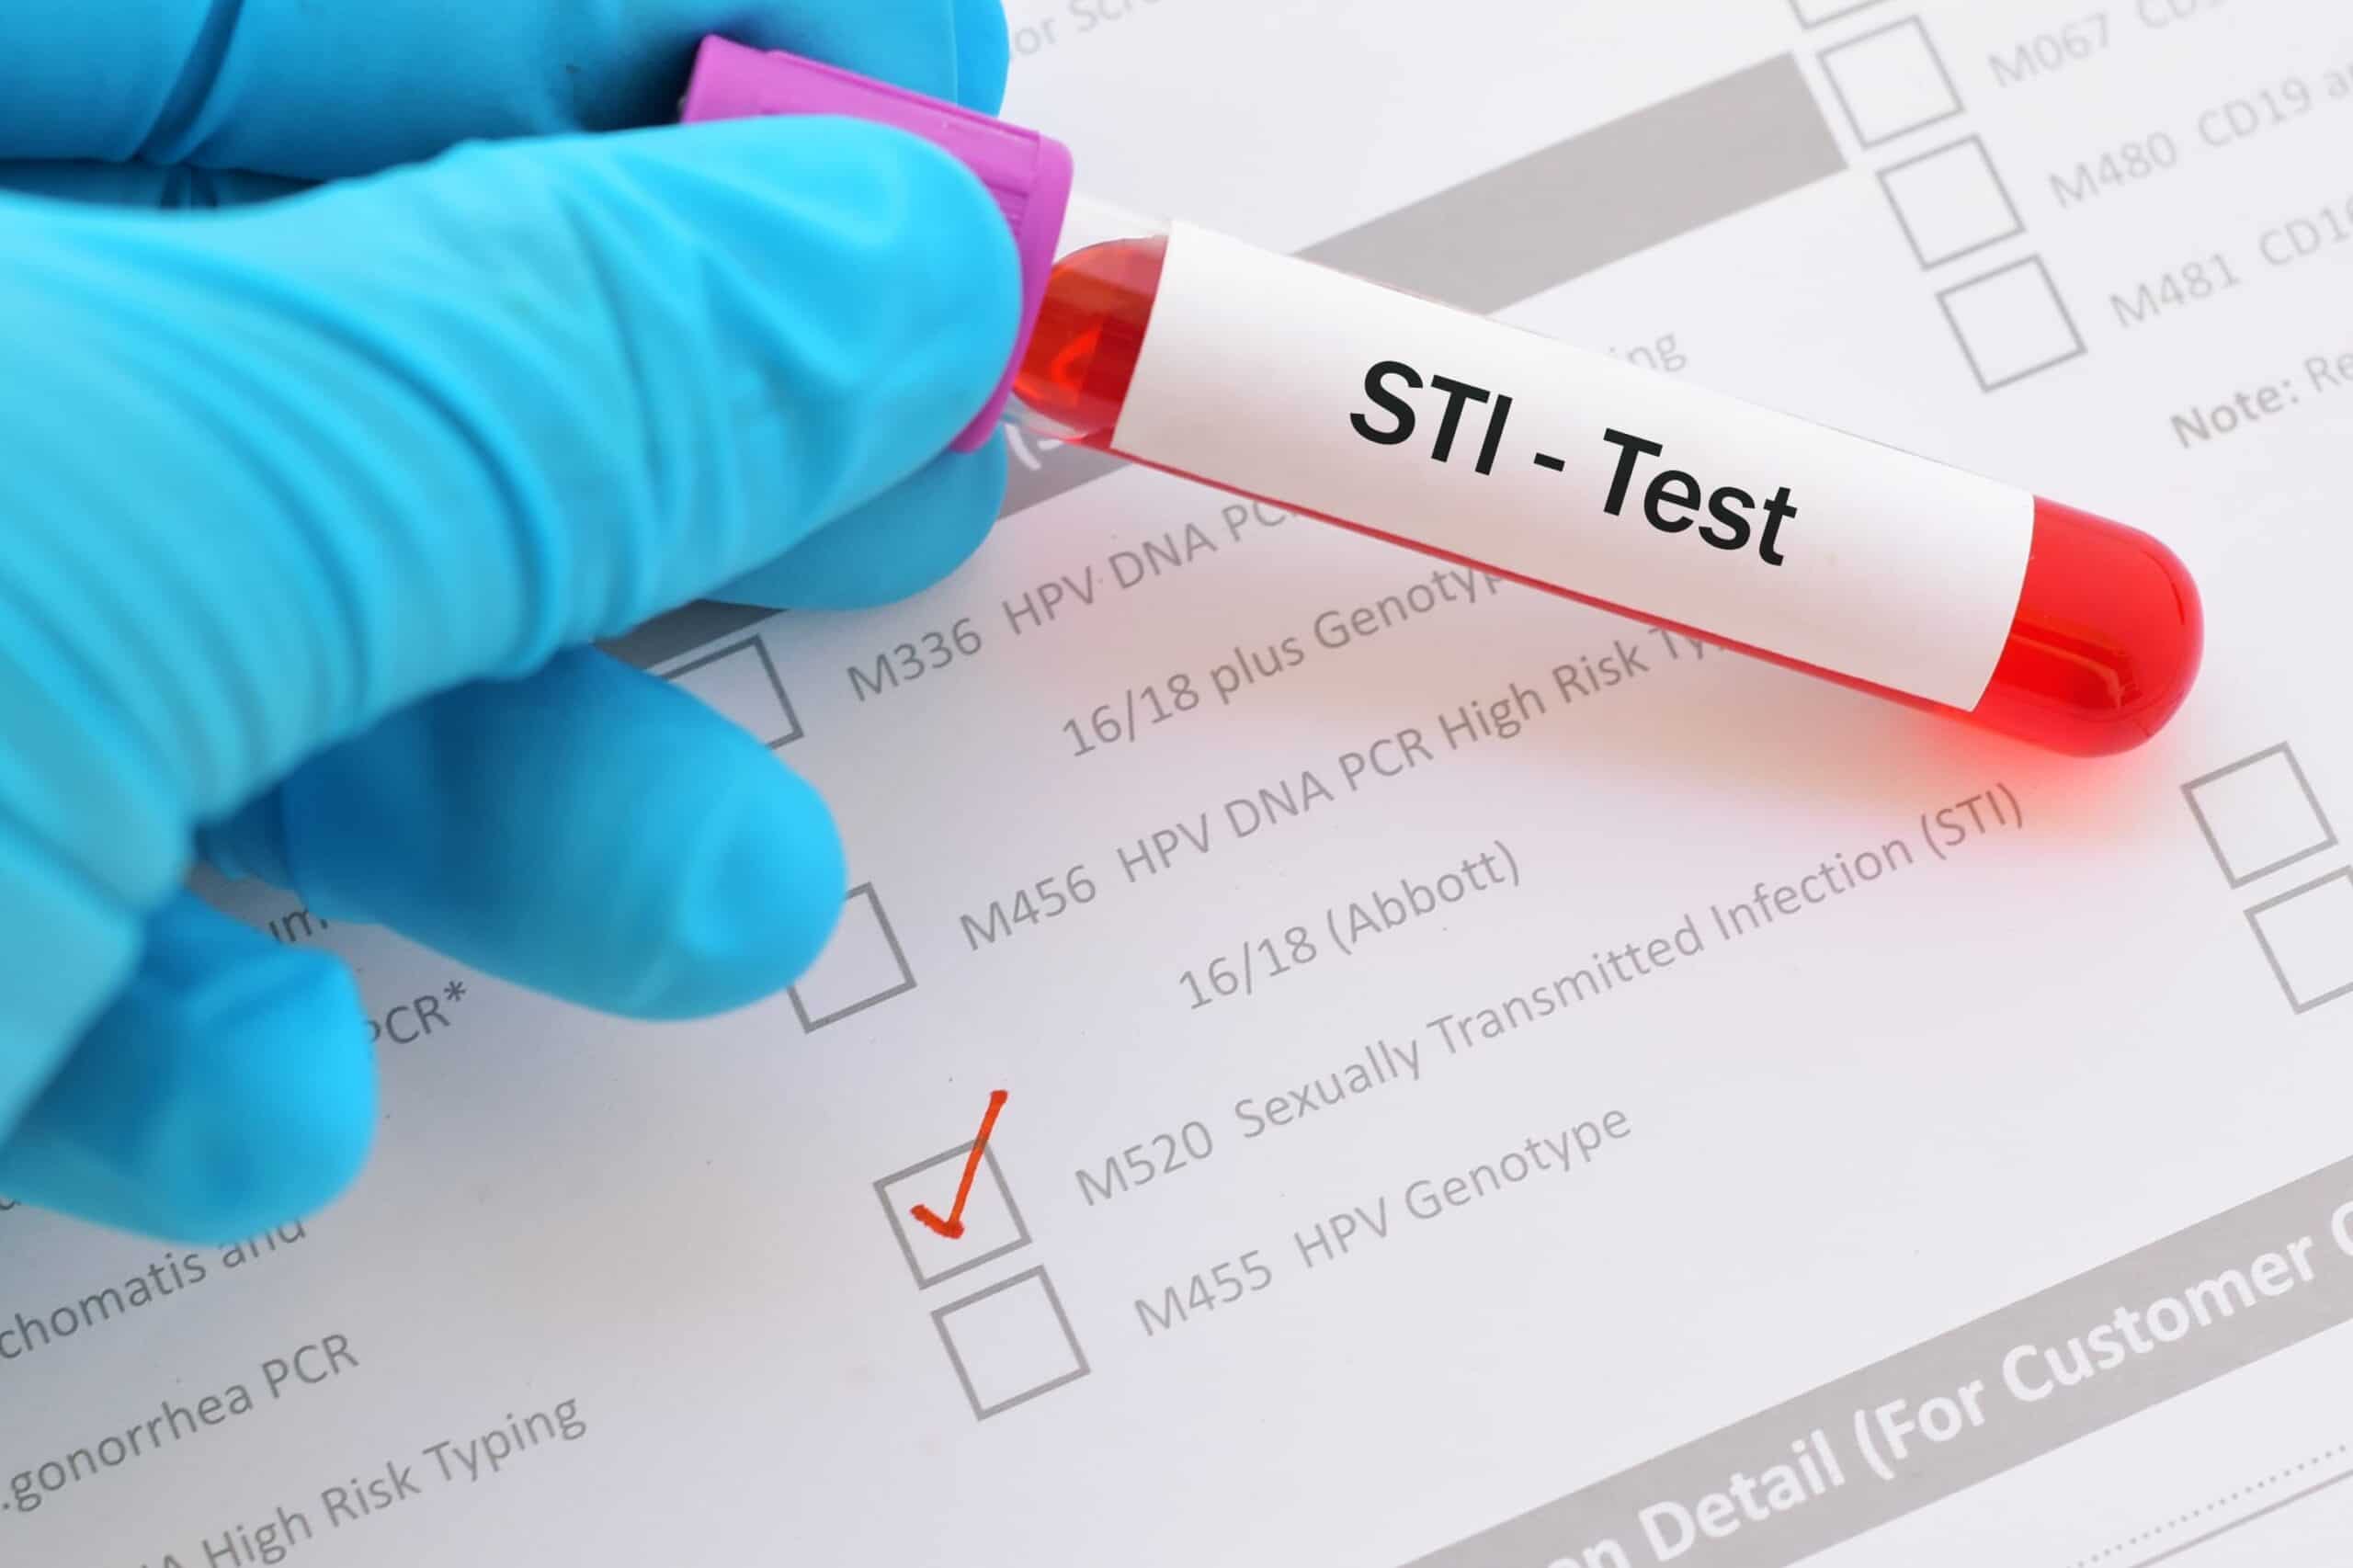 How often should you actually go for an sti test?